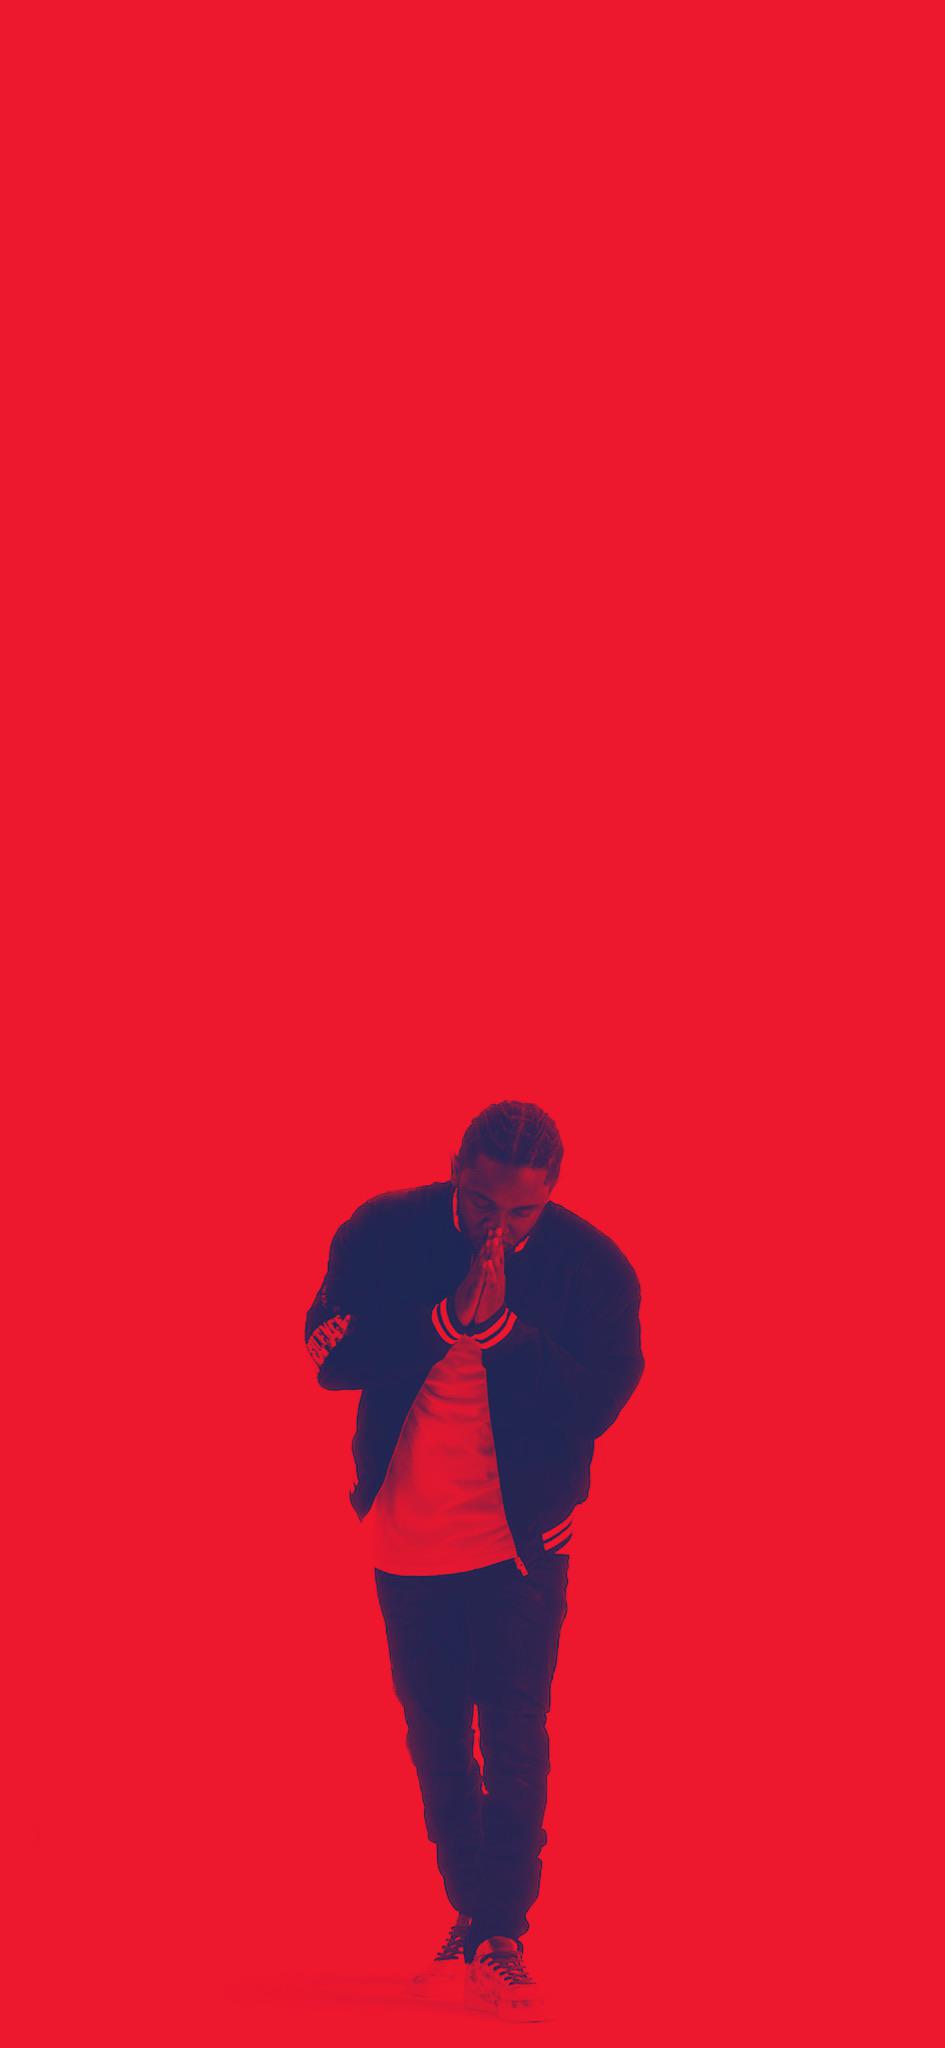 Just a cool simple Kdot iPhone wallpaper I made, enjoy!